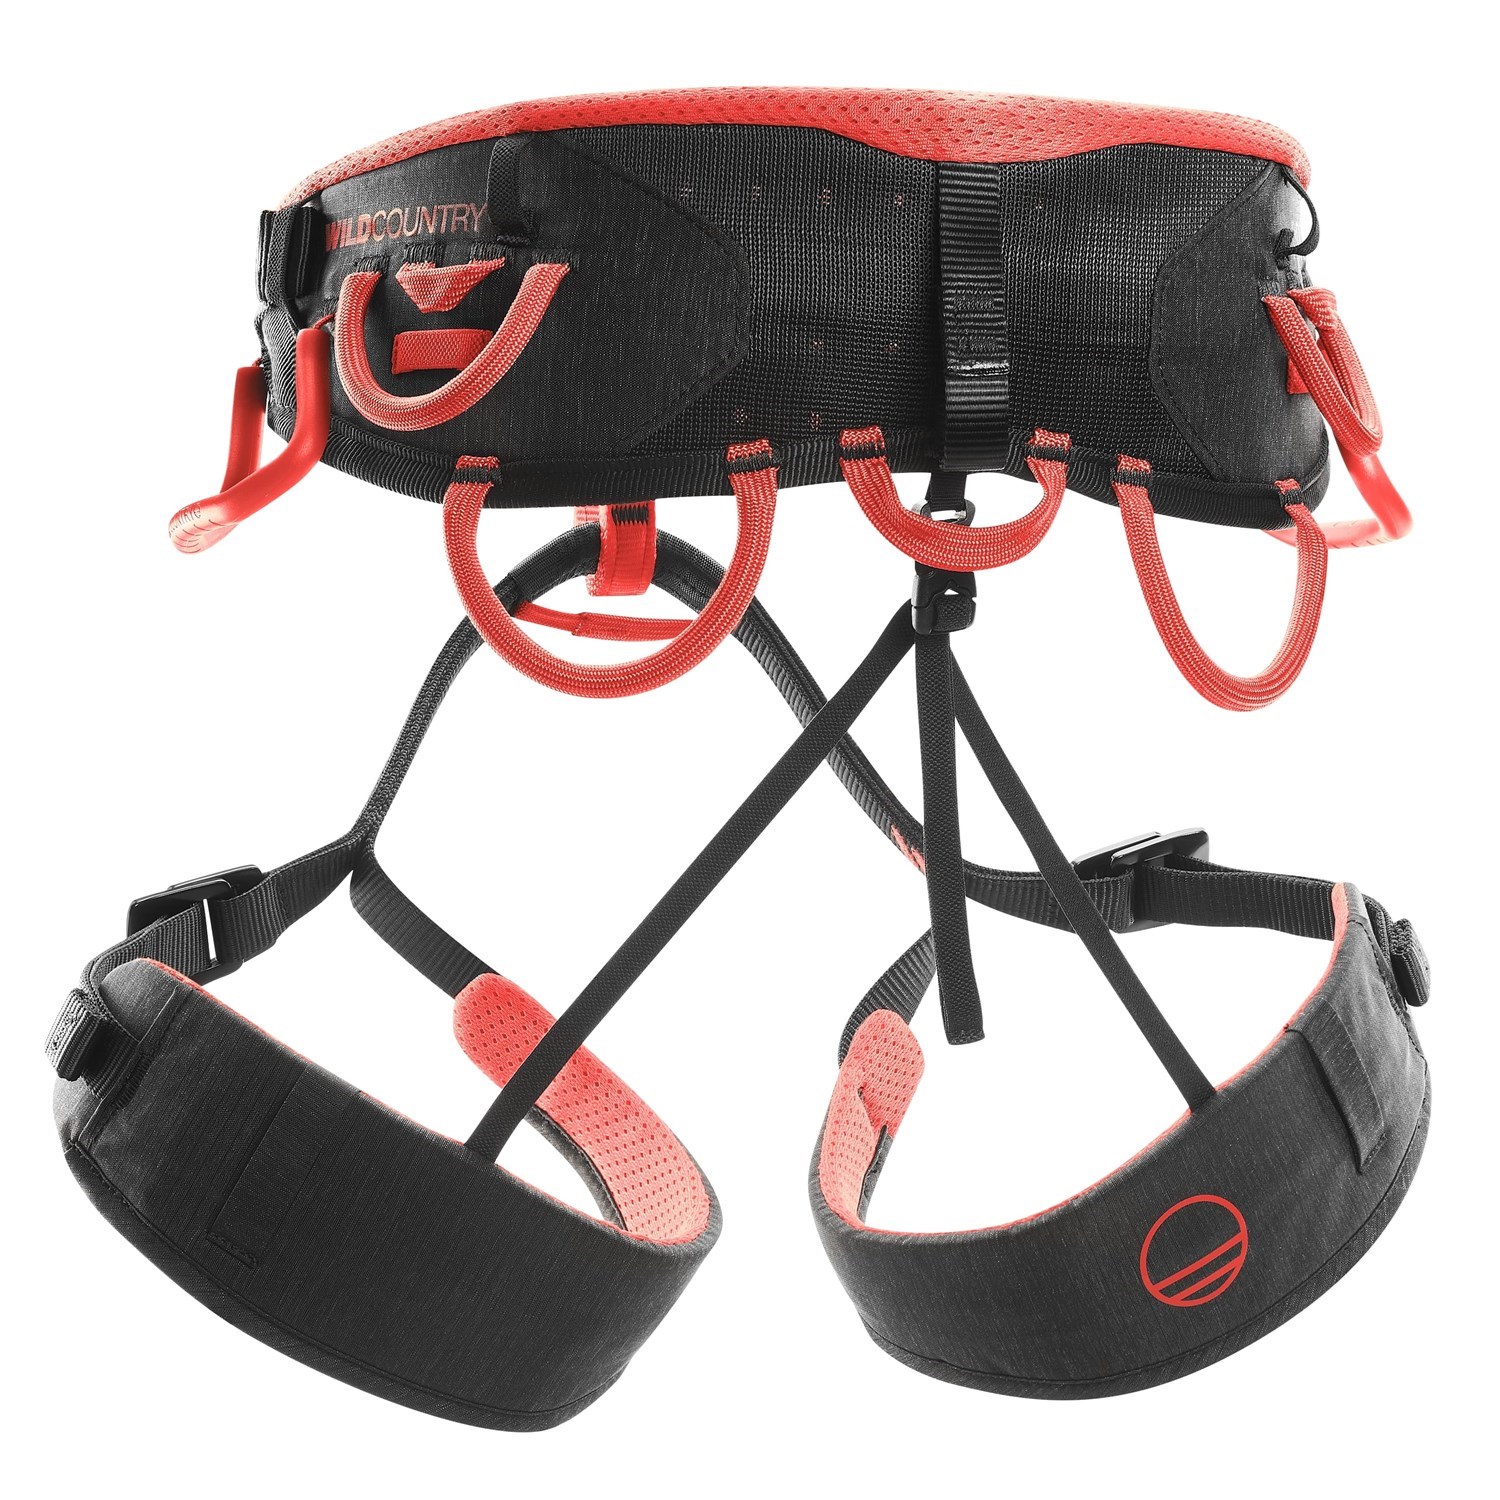 Wild Country Syncro Rock Climbing Harness